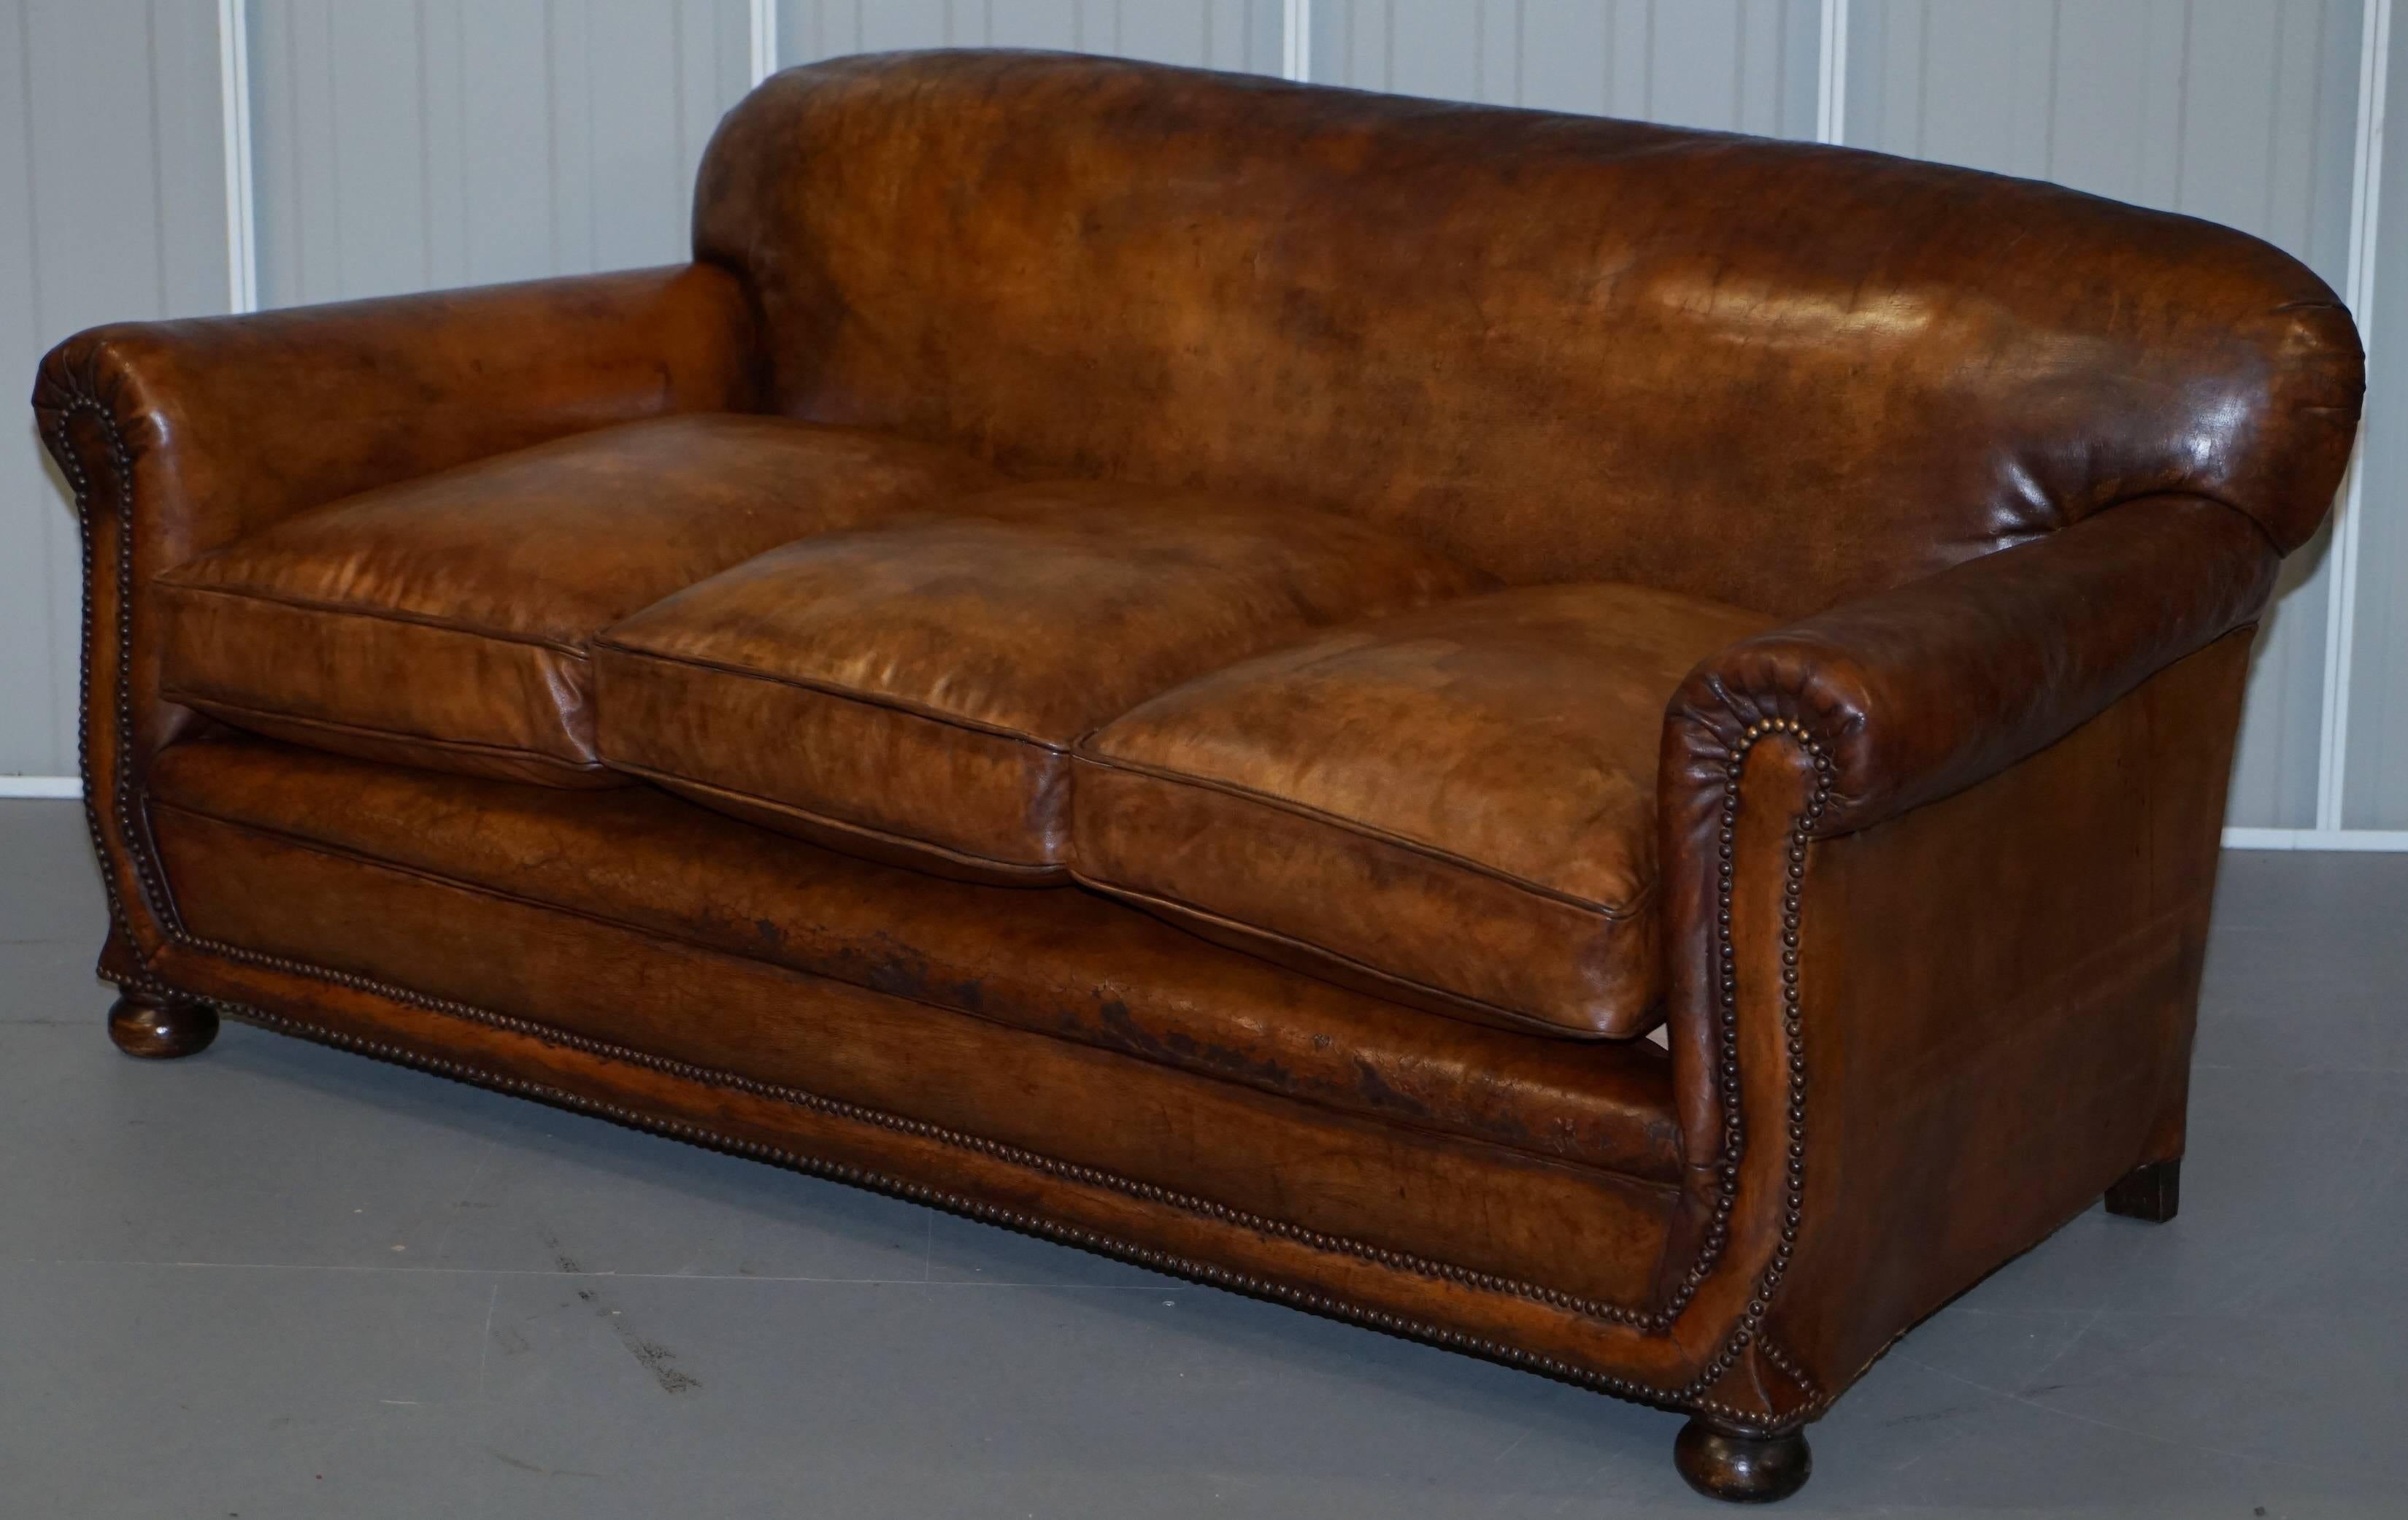 Edwardian Gentleman's Club Three-Piece Suite Pair of Armchairs and Sofa 1